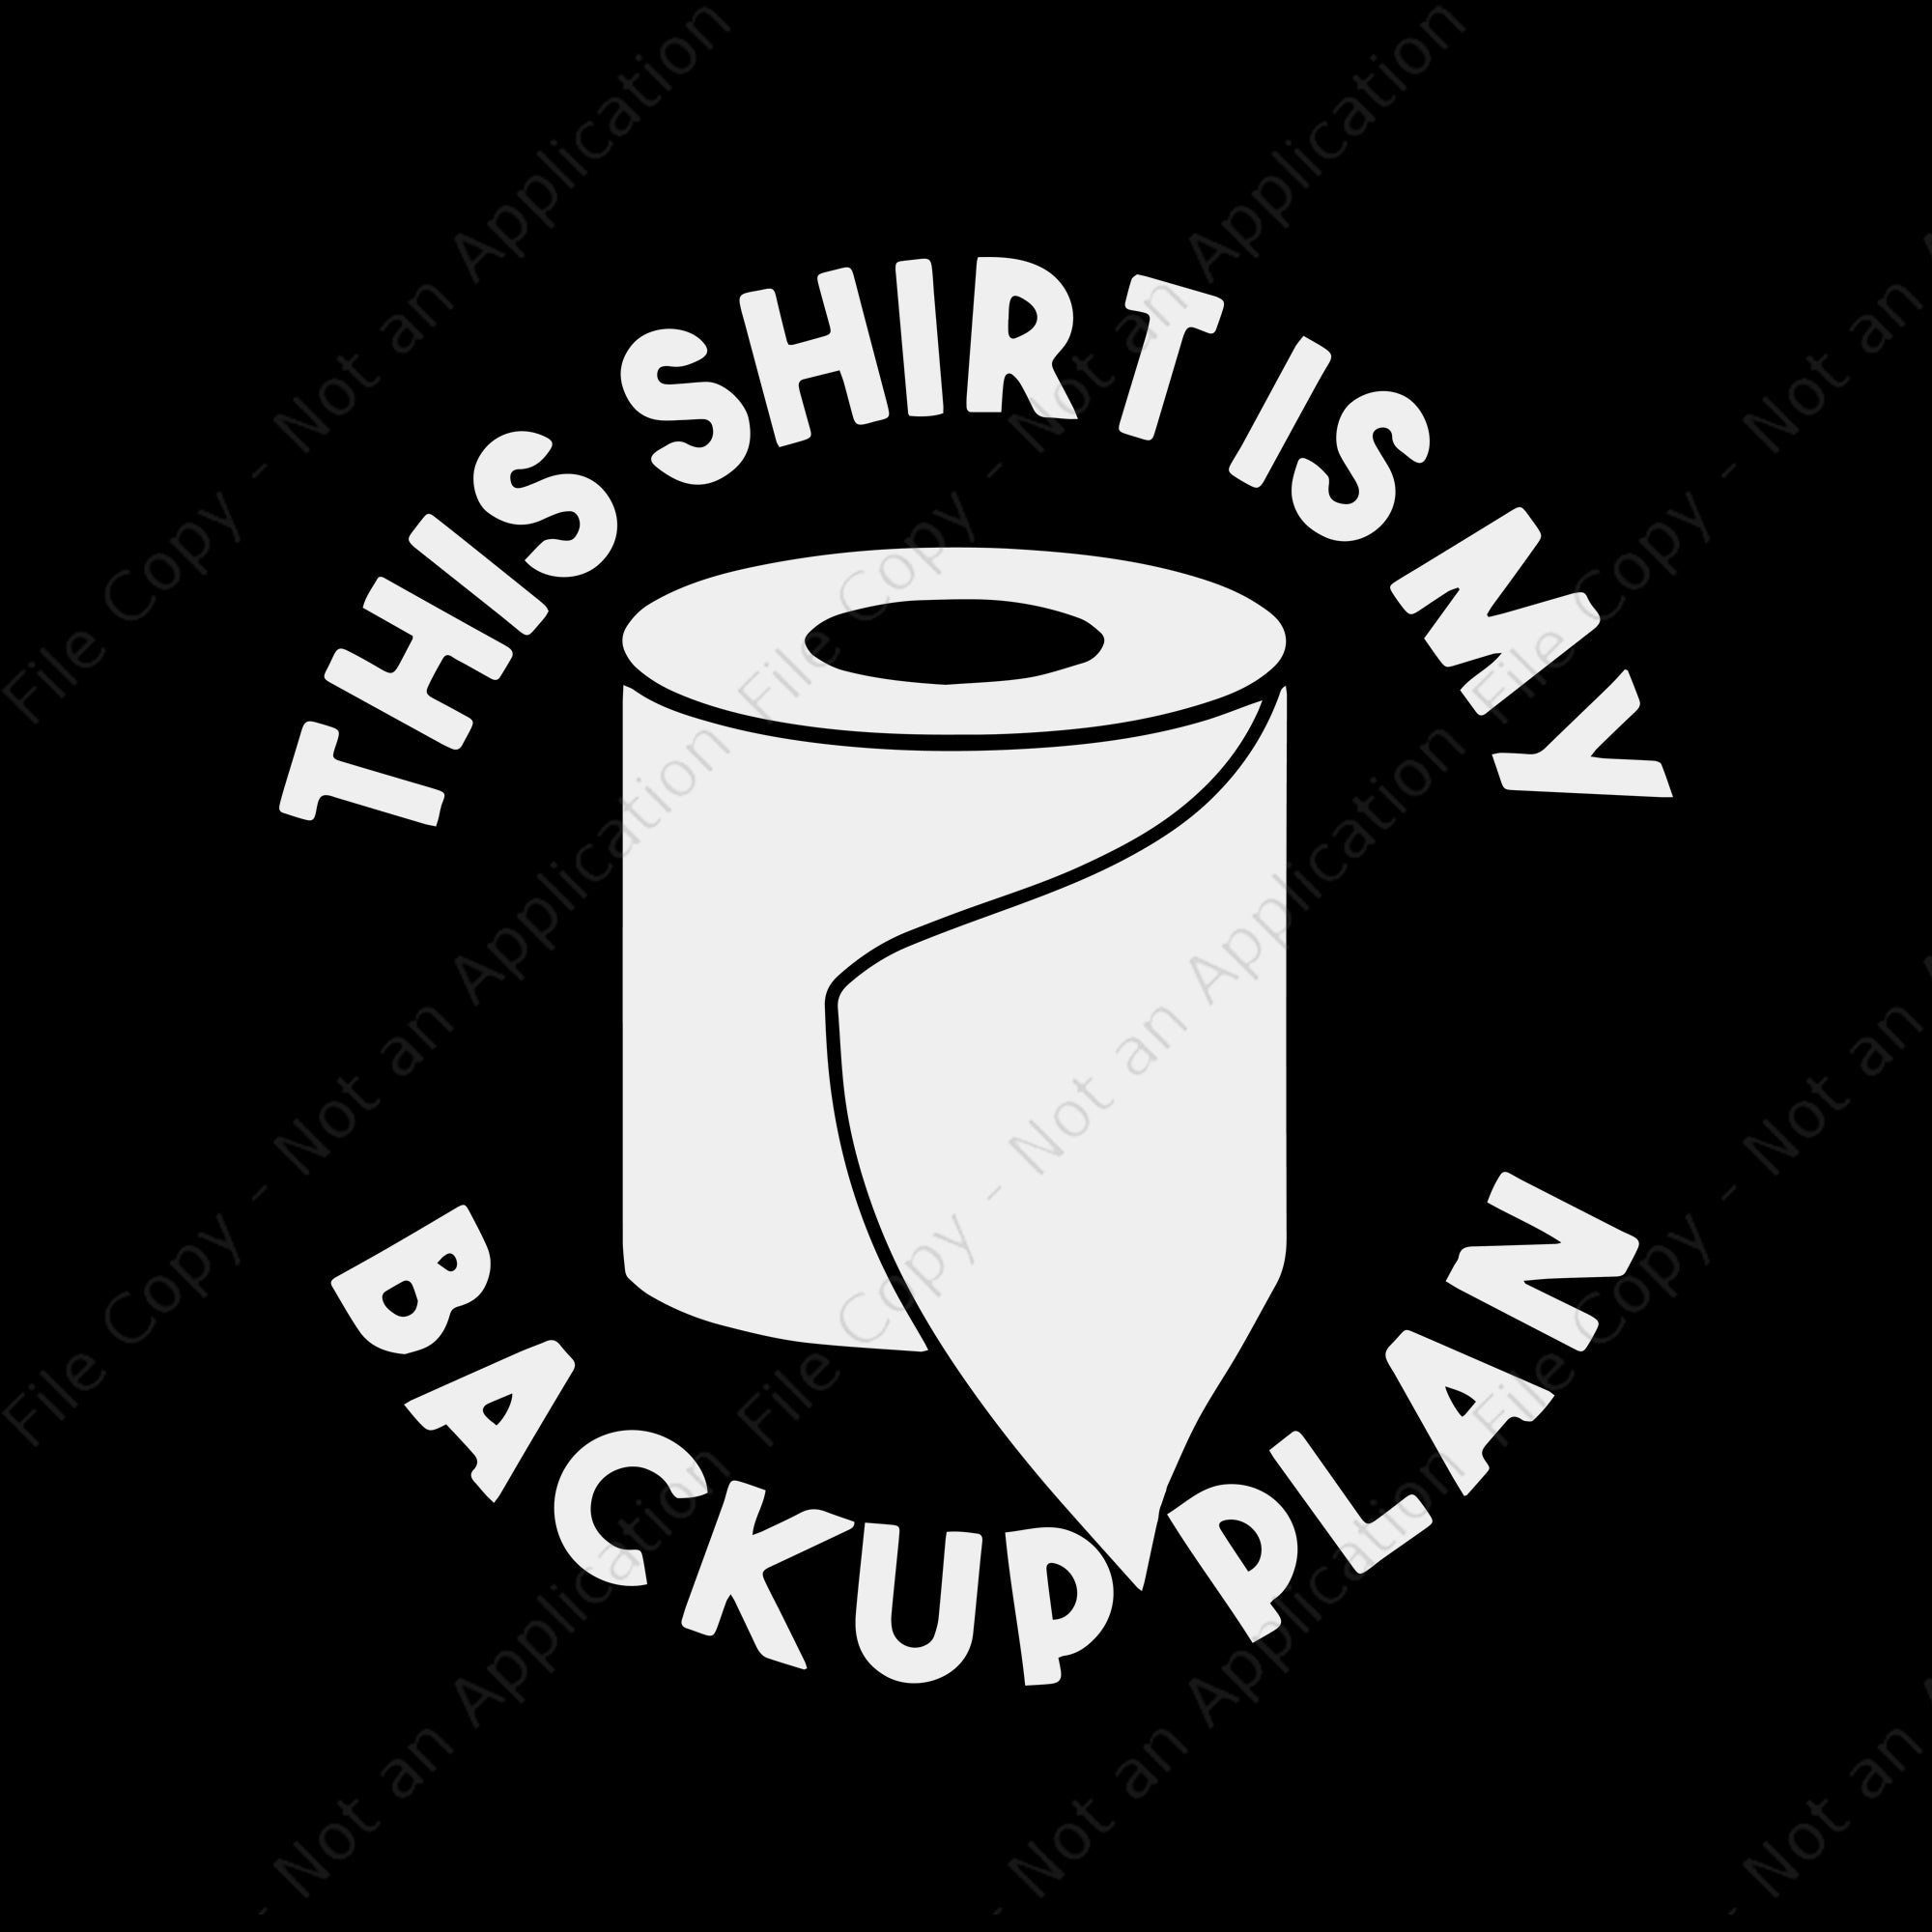 This shirt is my back up plan toilet paper svg, this shirt is my back up plan toilet paper eps, dxf, svg file